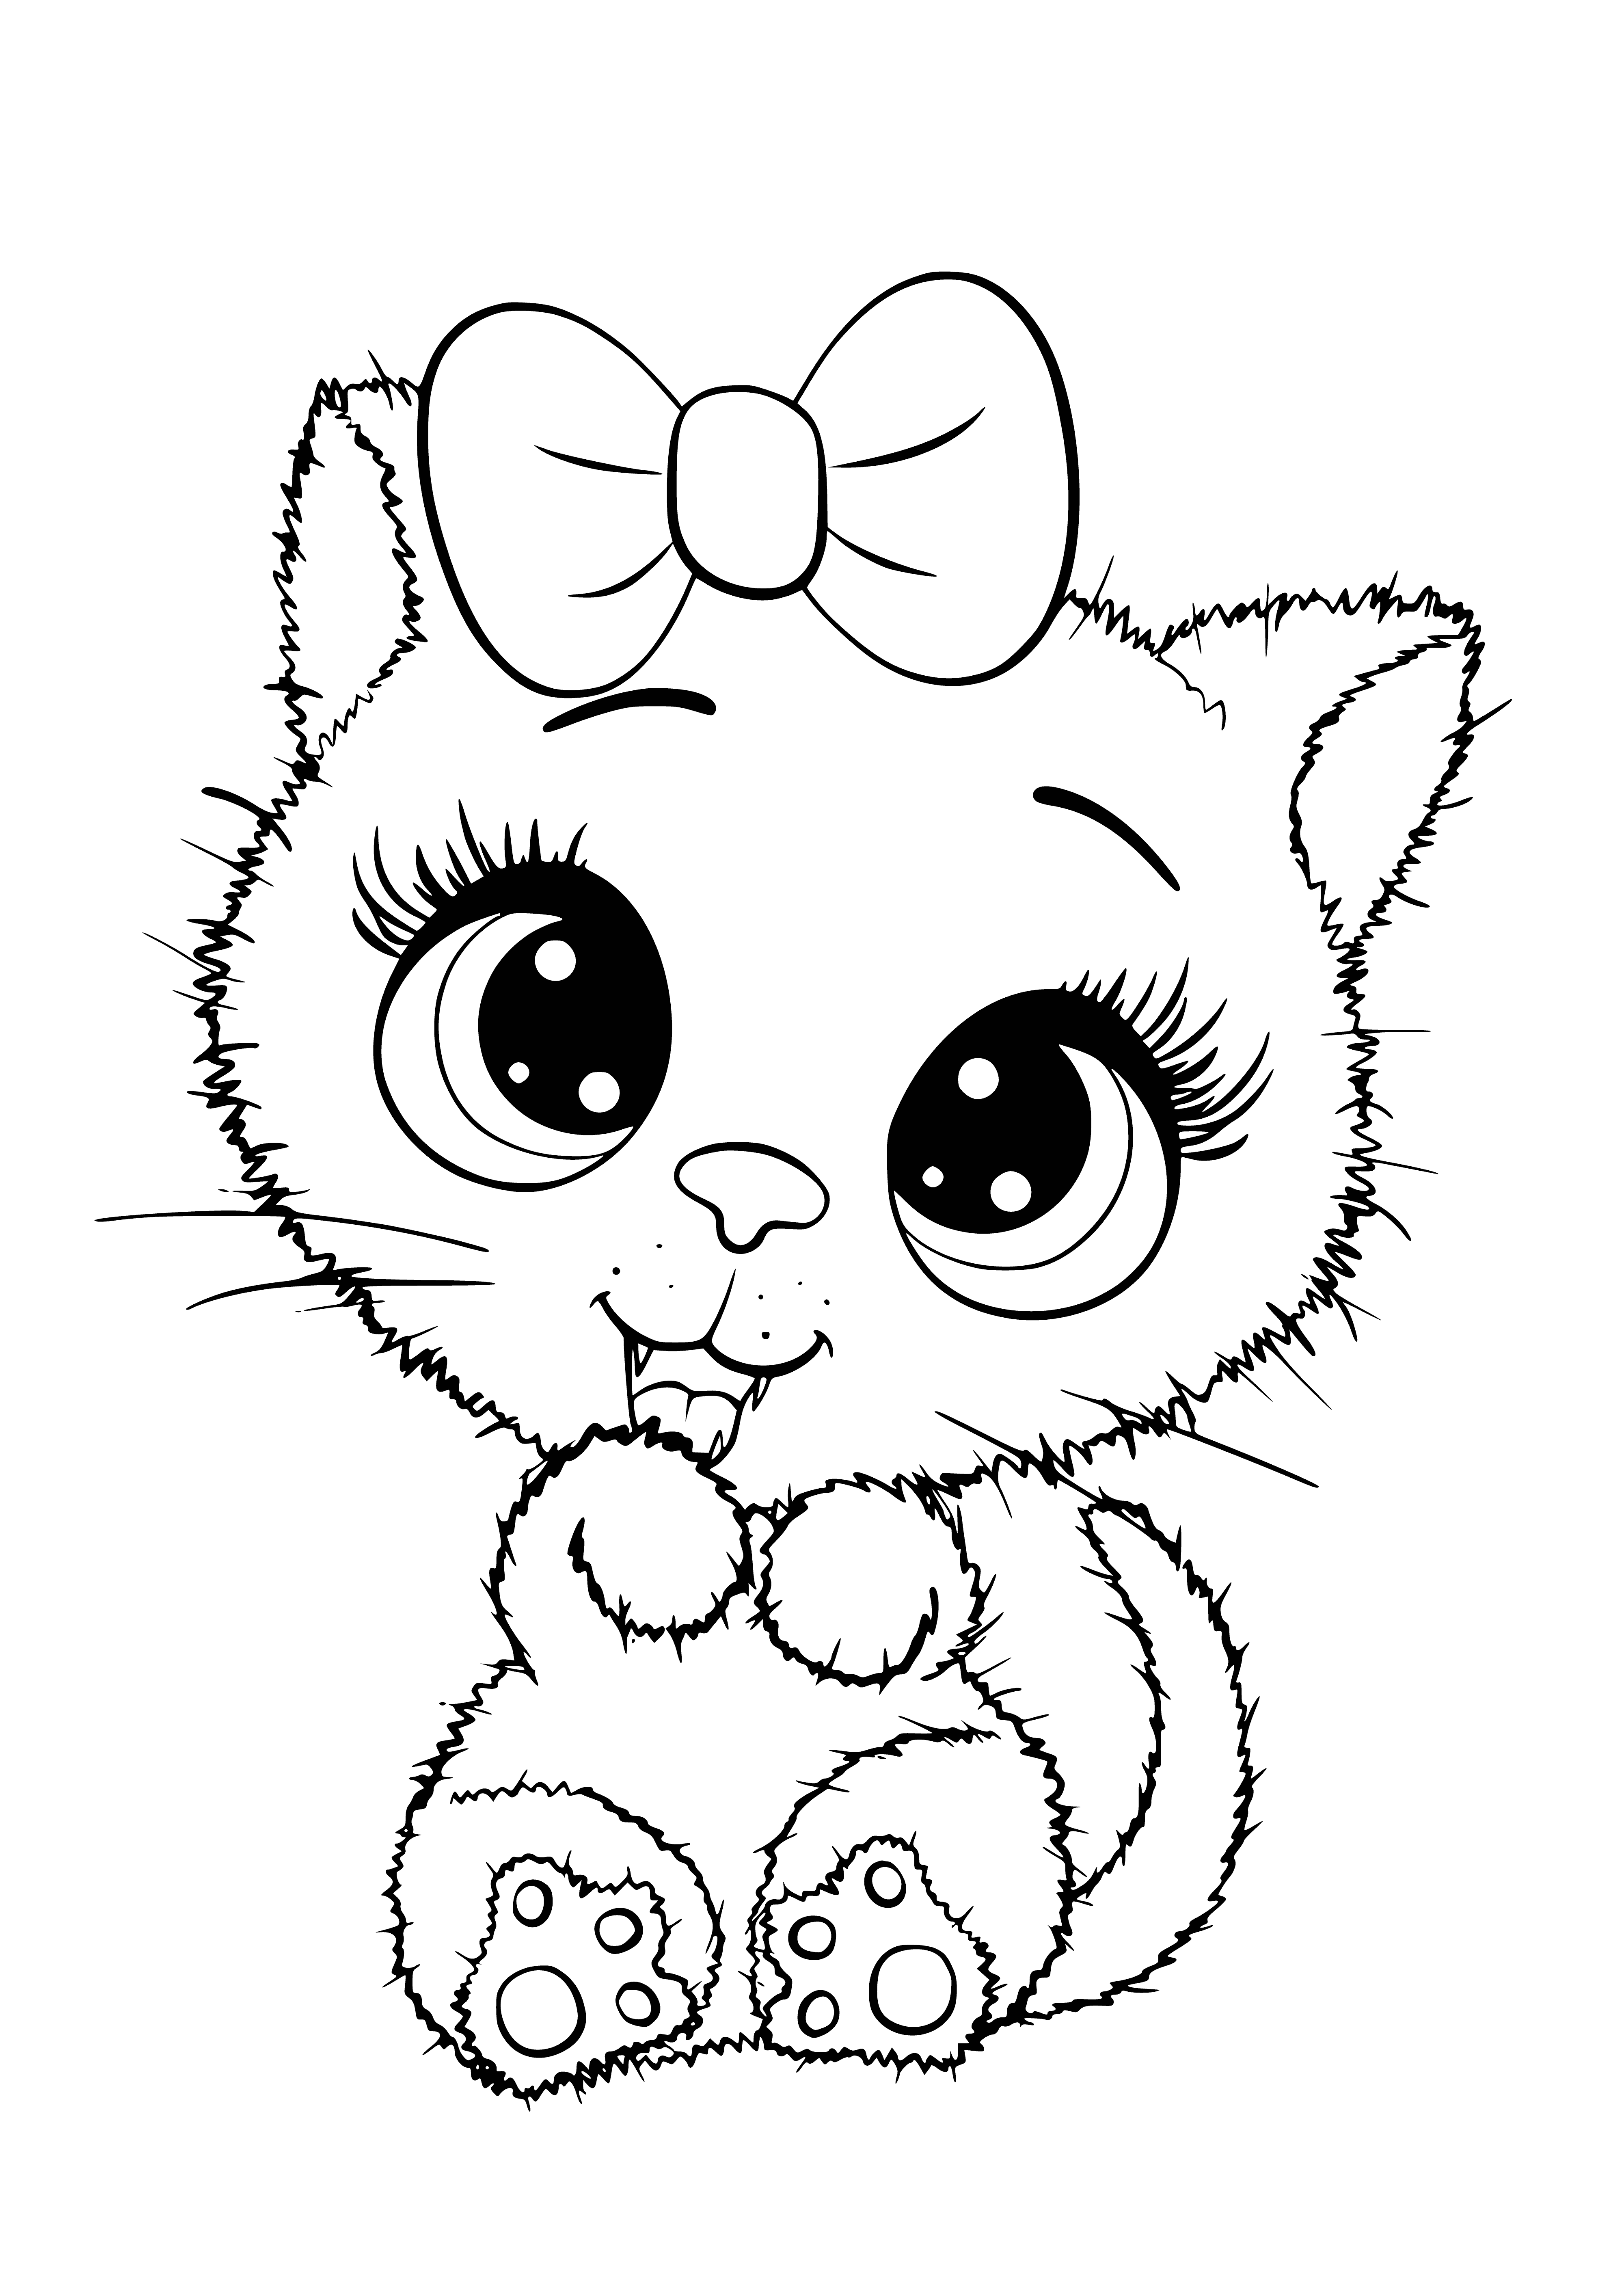 coloring page: A cute kitty with big eyes and yellow/orange fur, all fluffed up with a big fluffy tail.